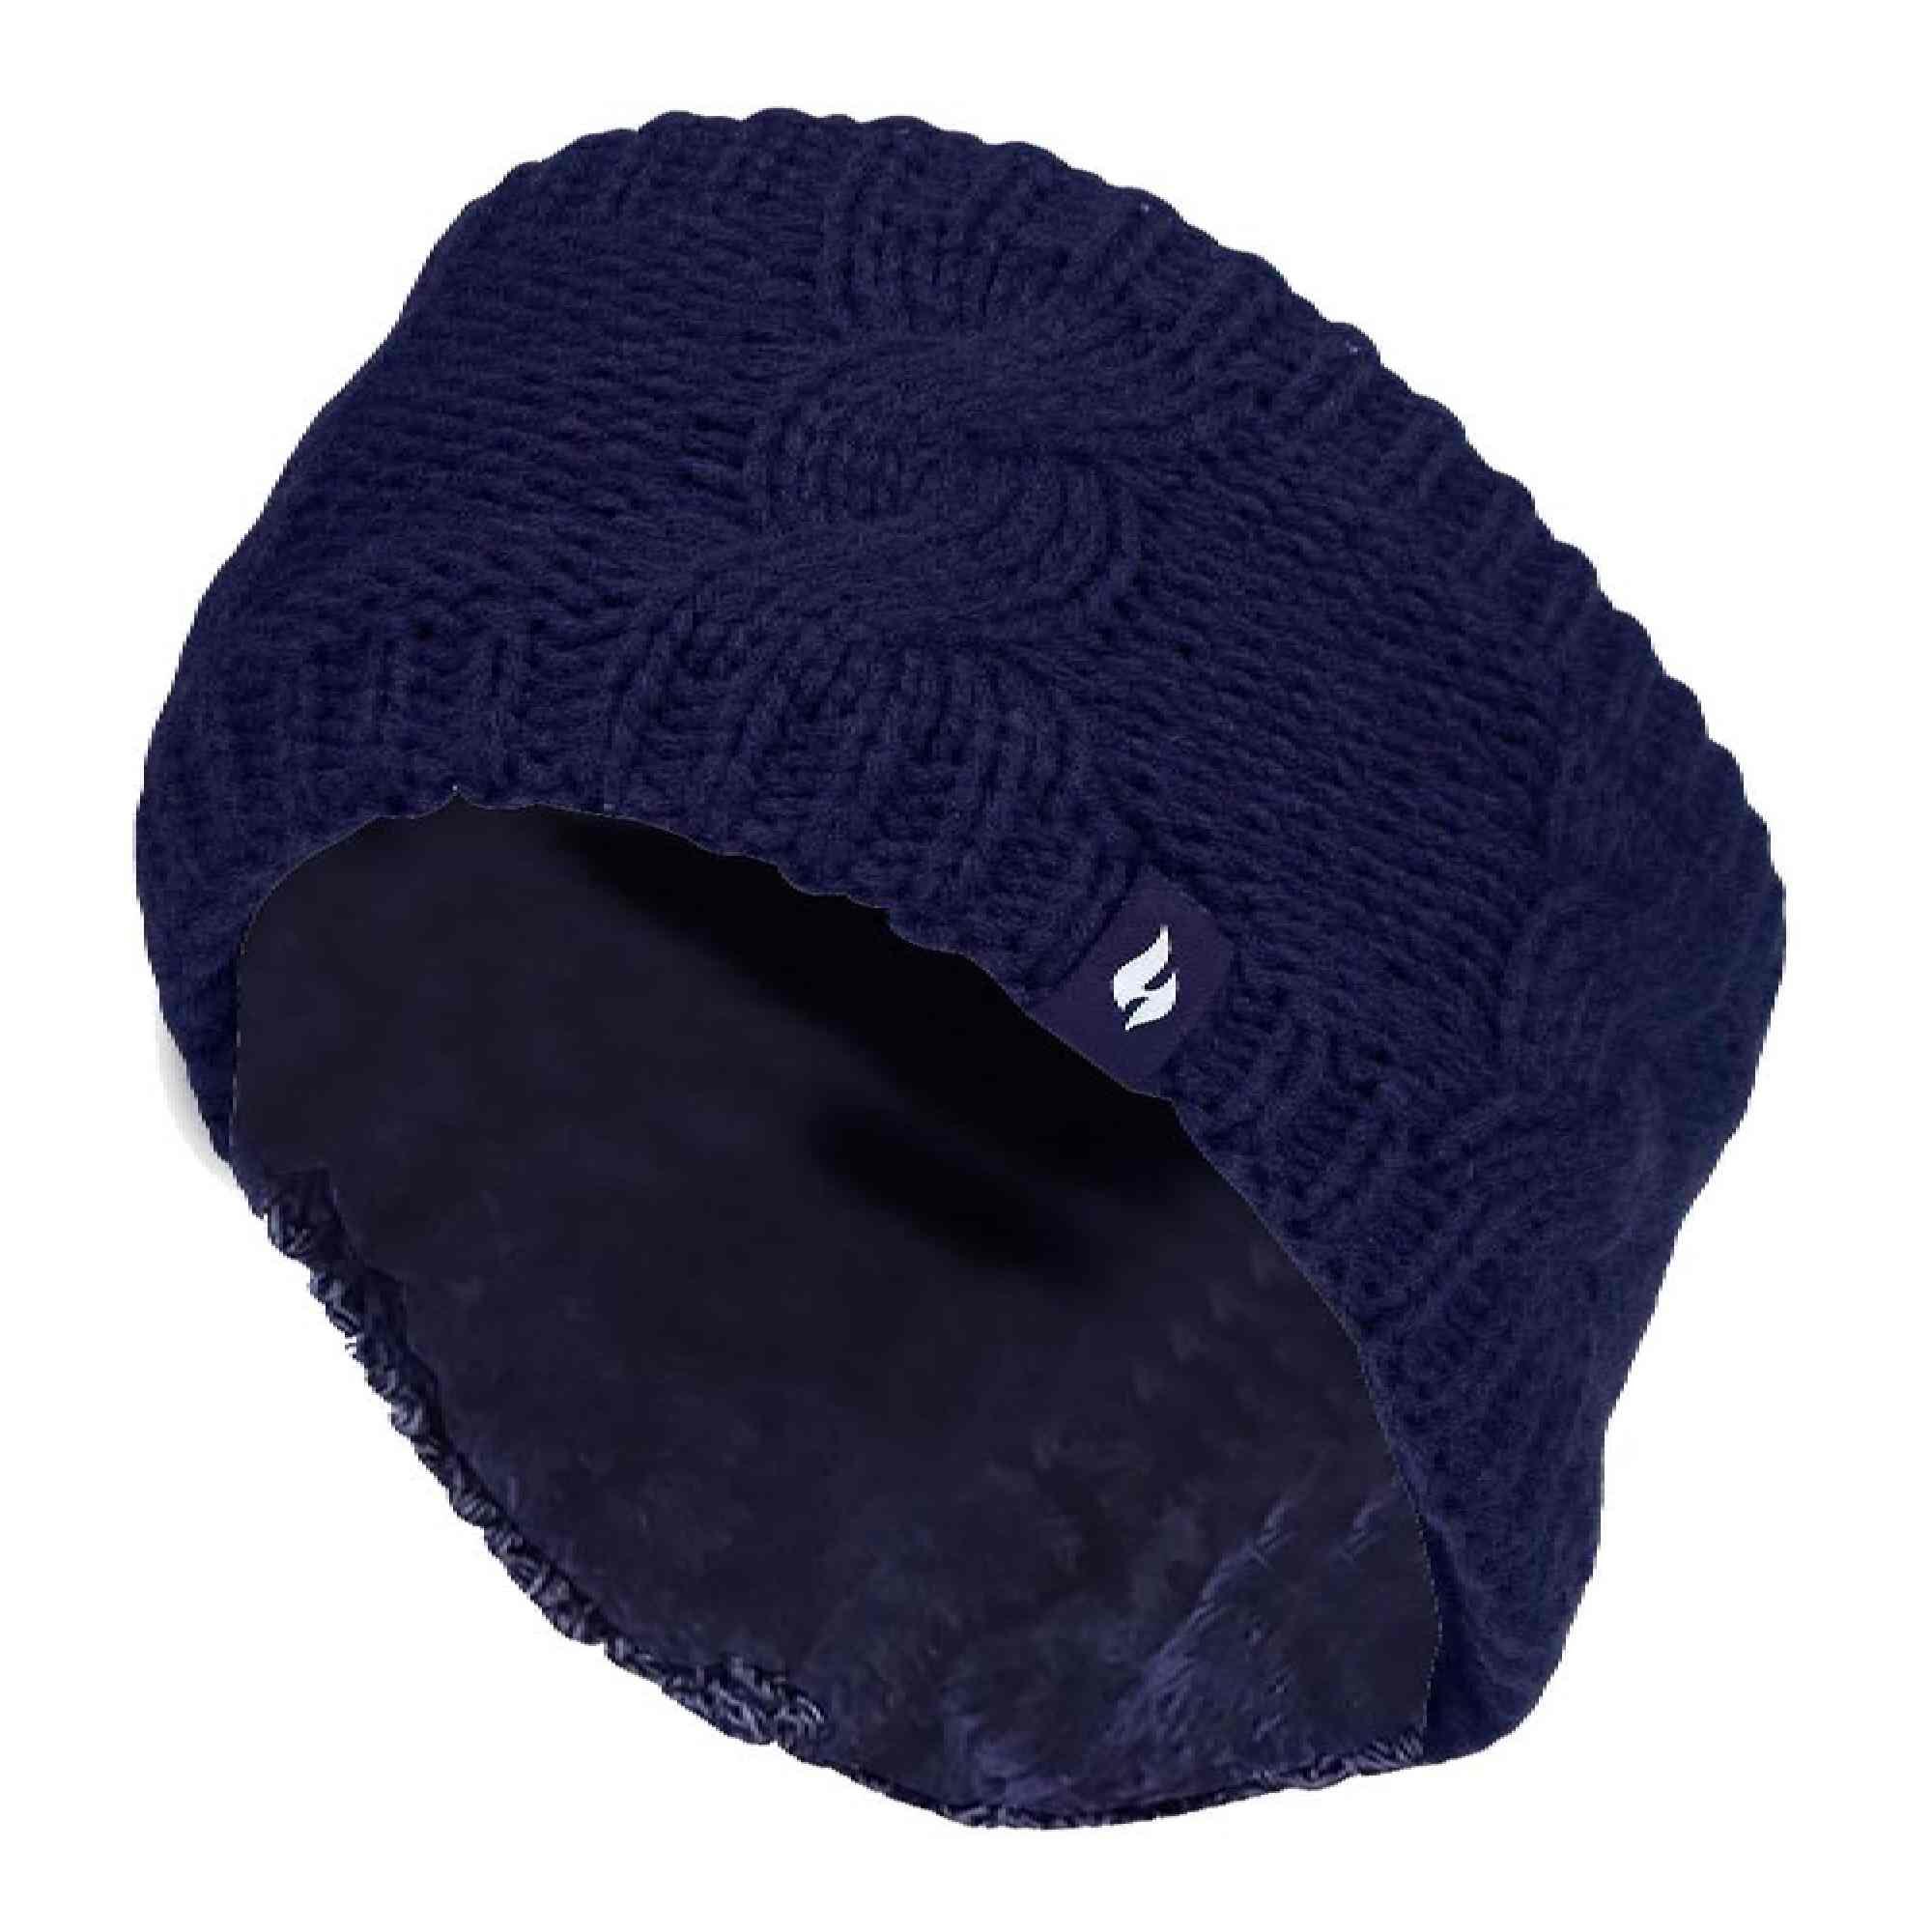 Ladies Cable Knitted Fleece Lined Thermal Winter Ear Warmer Headband 1/4